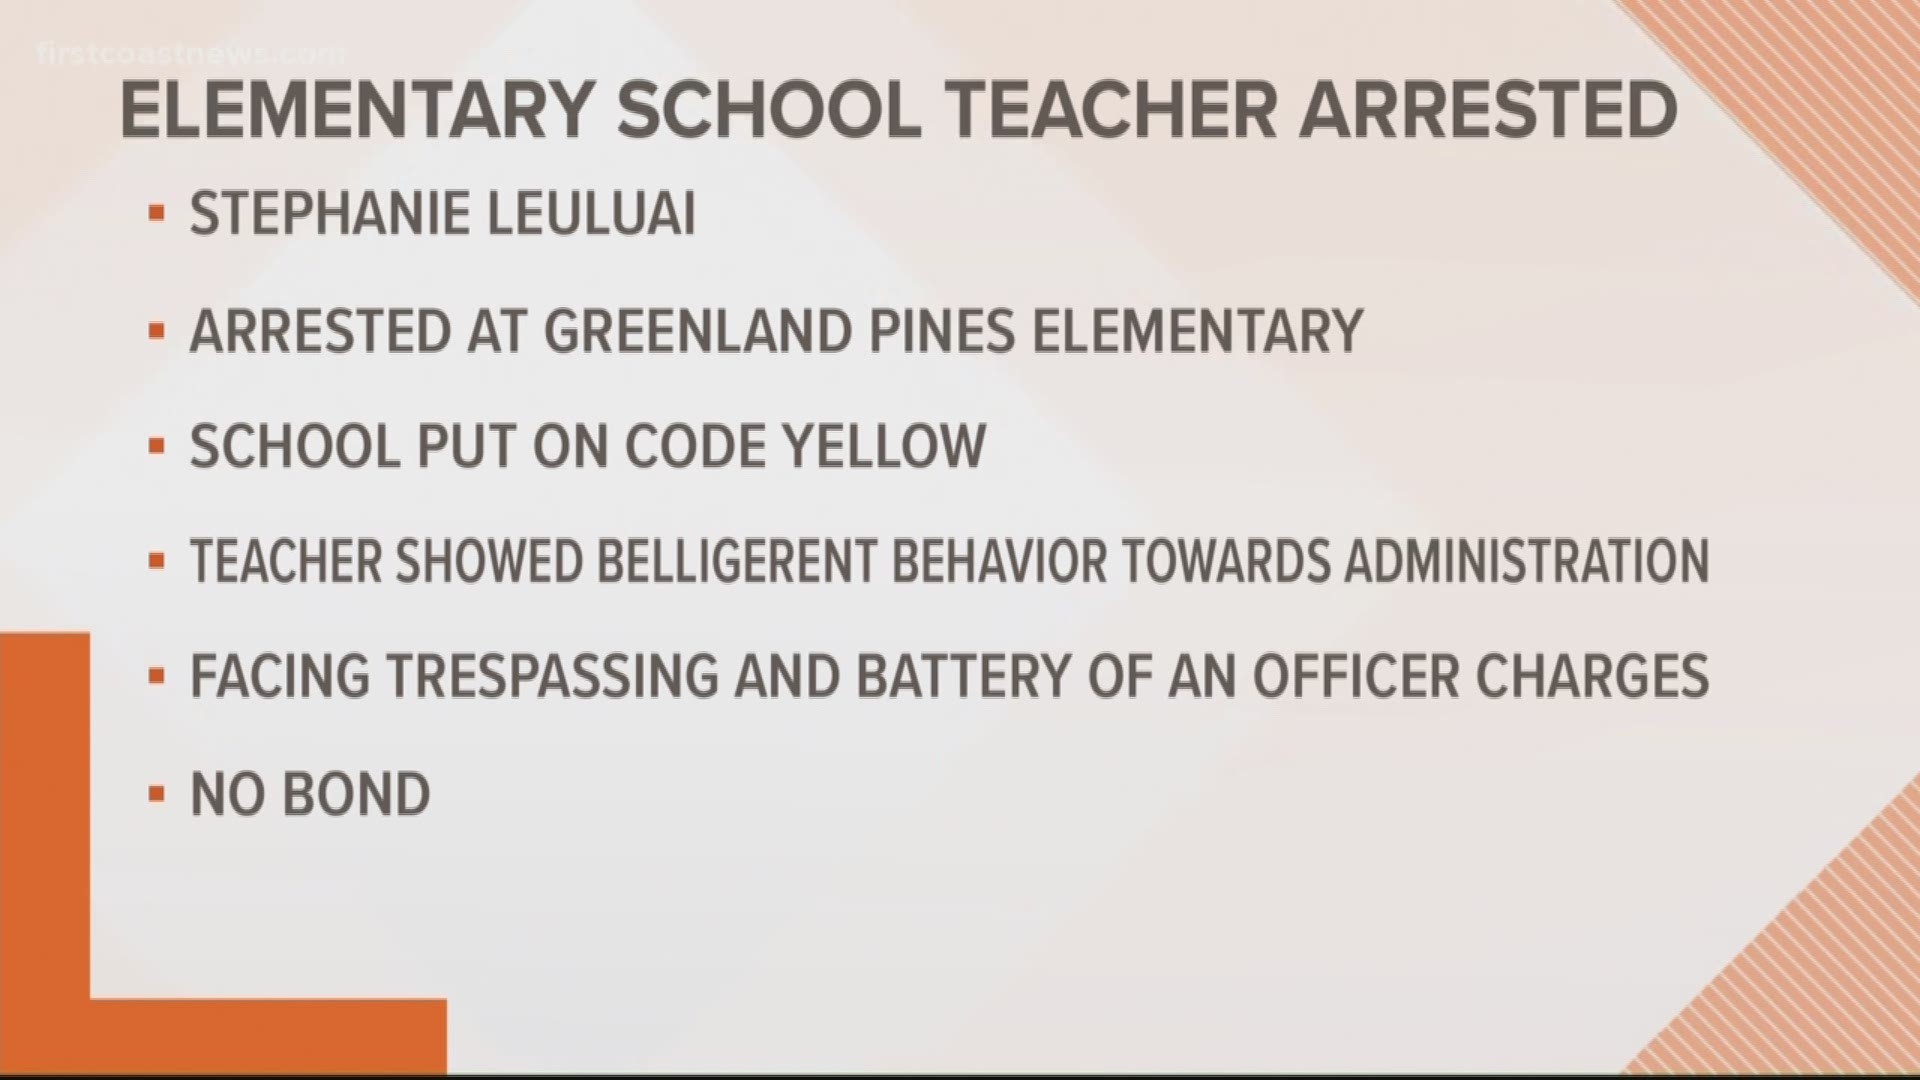 A Greenland Pines Elementary teacher was arrested Tuesday and charged with battery on an officer after school officials say she exhibited "Belligerent behavior."